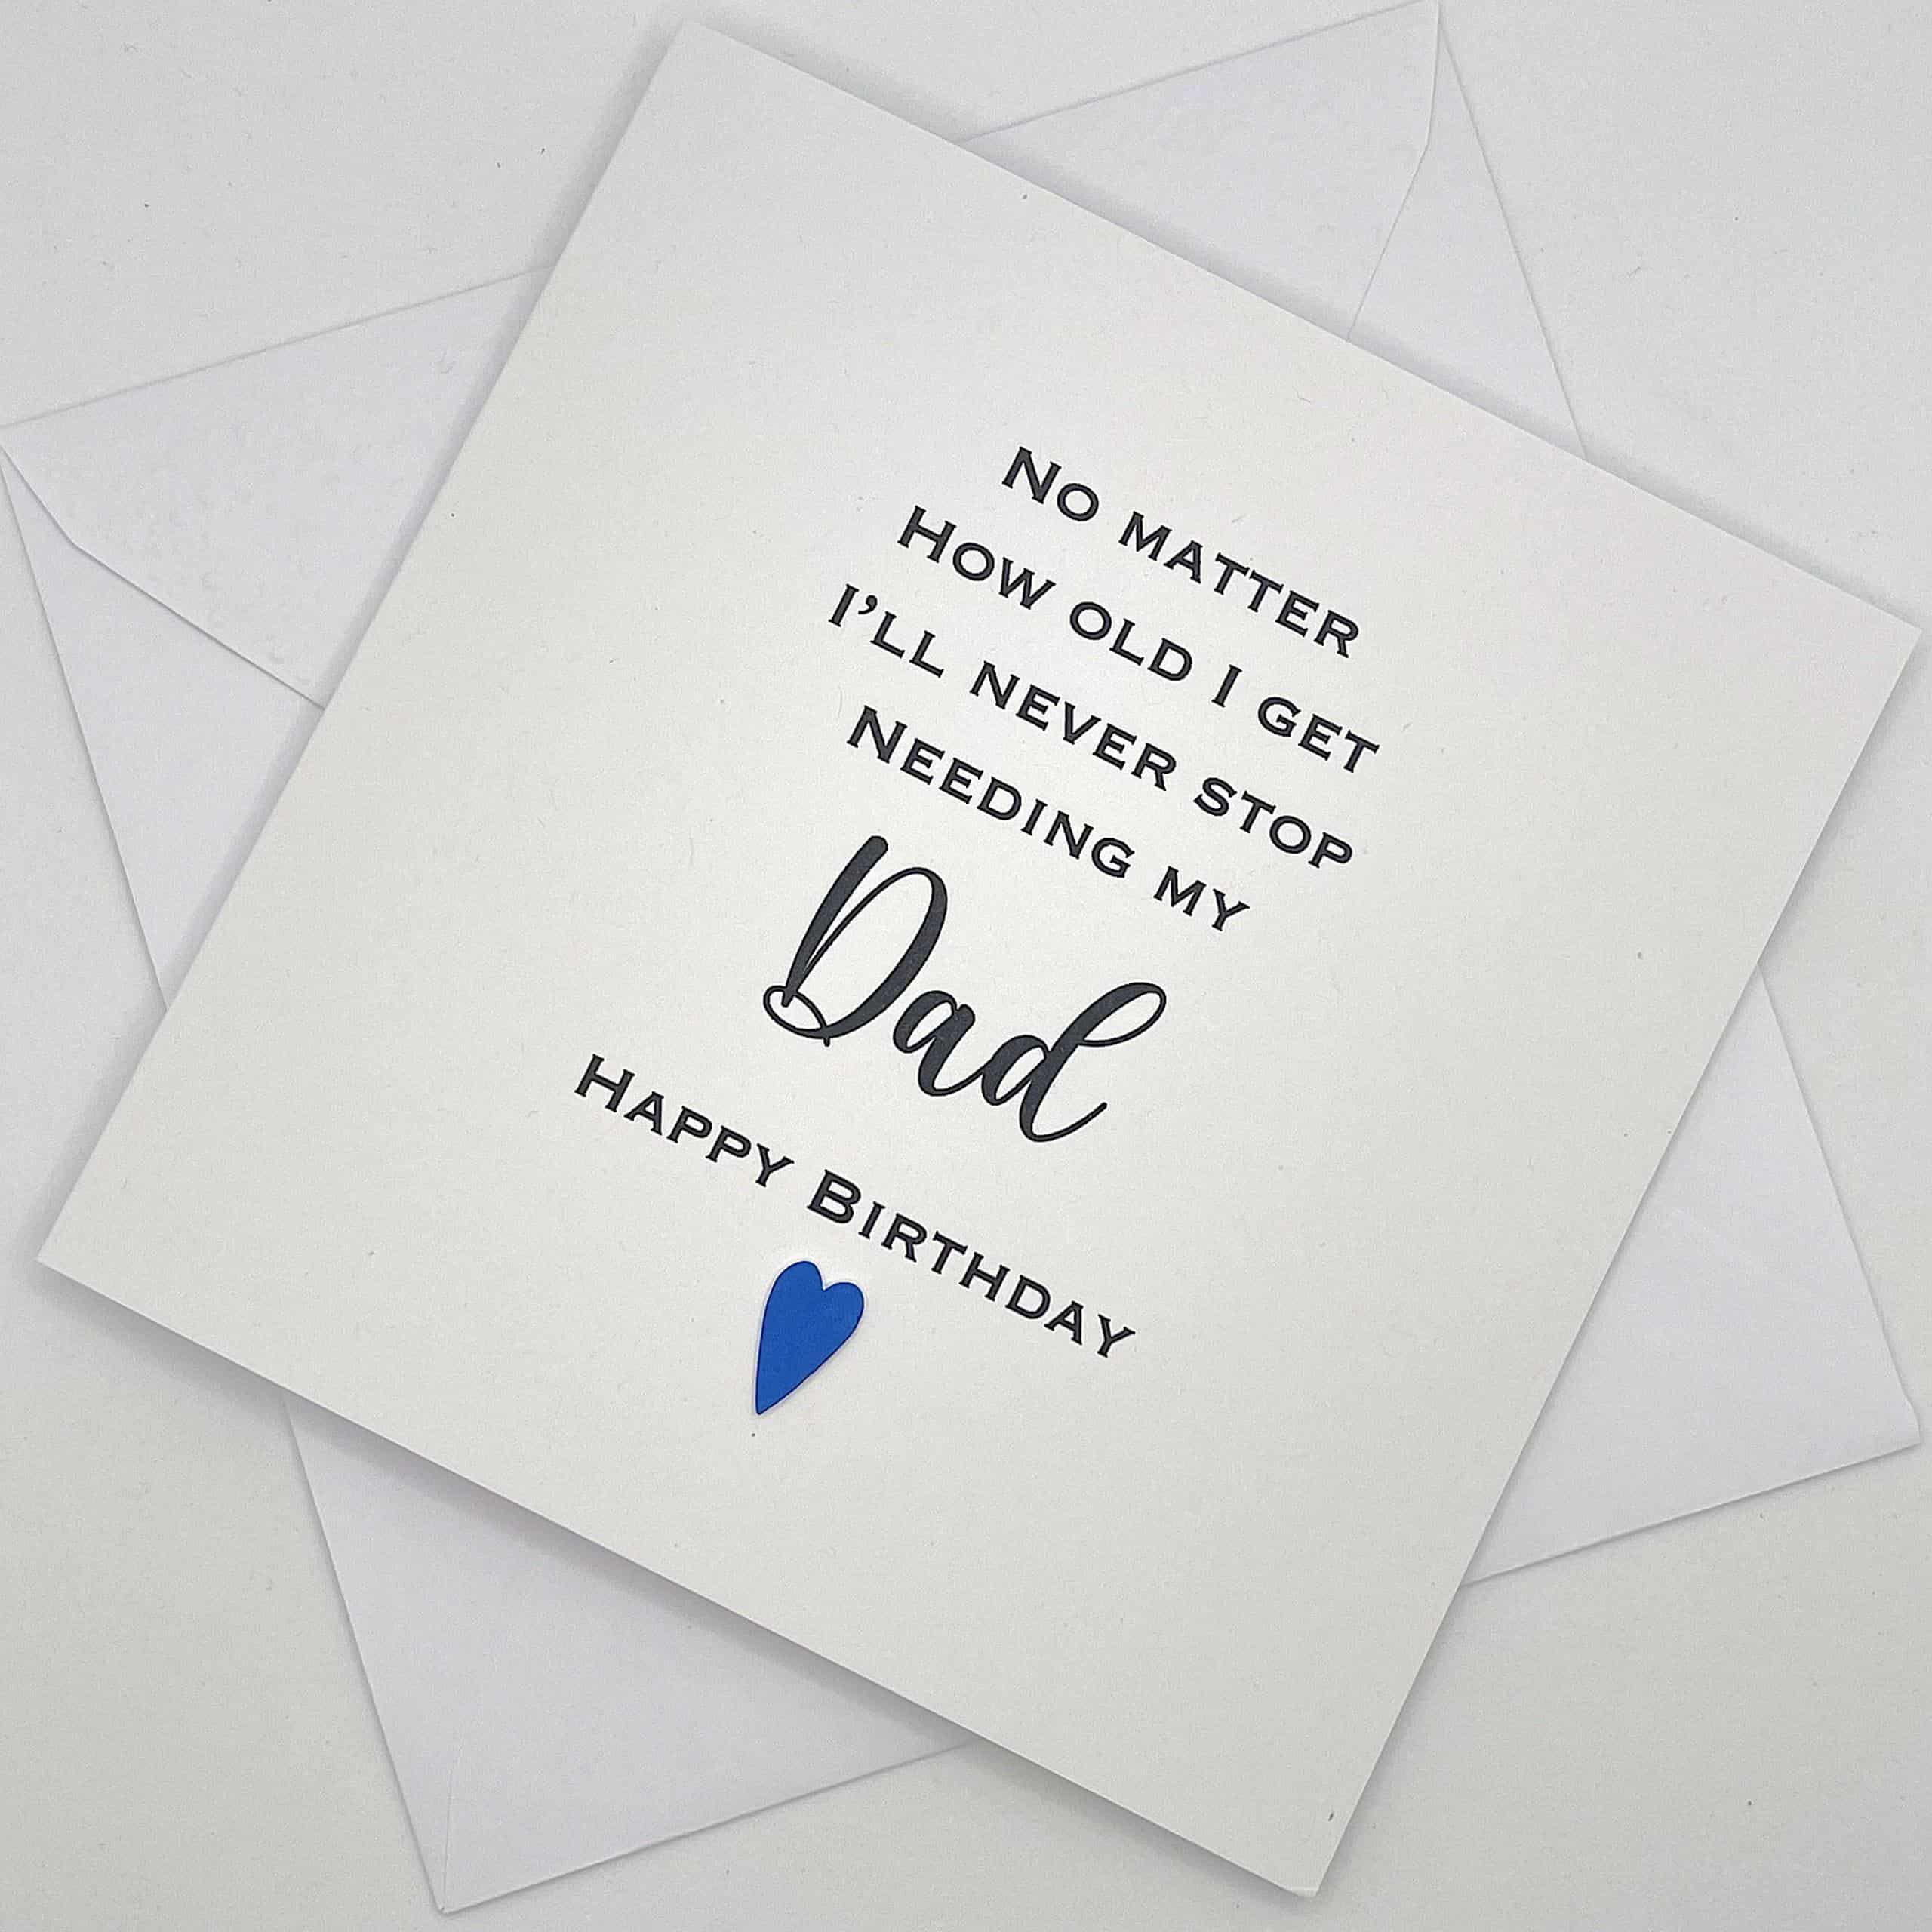 Dad　Free　Stop　by　Birthday　Delivery　Never　Card.　I'll　Inviting　Needing　Looks　my　Dad　with　UK